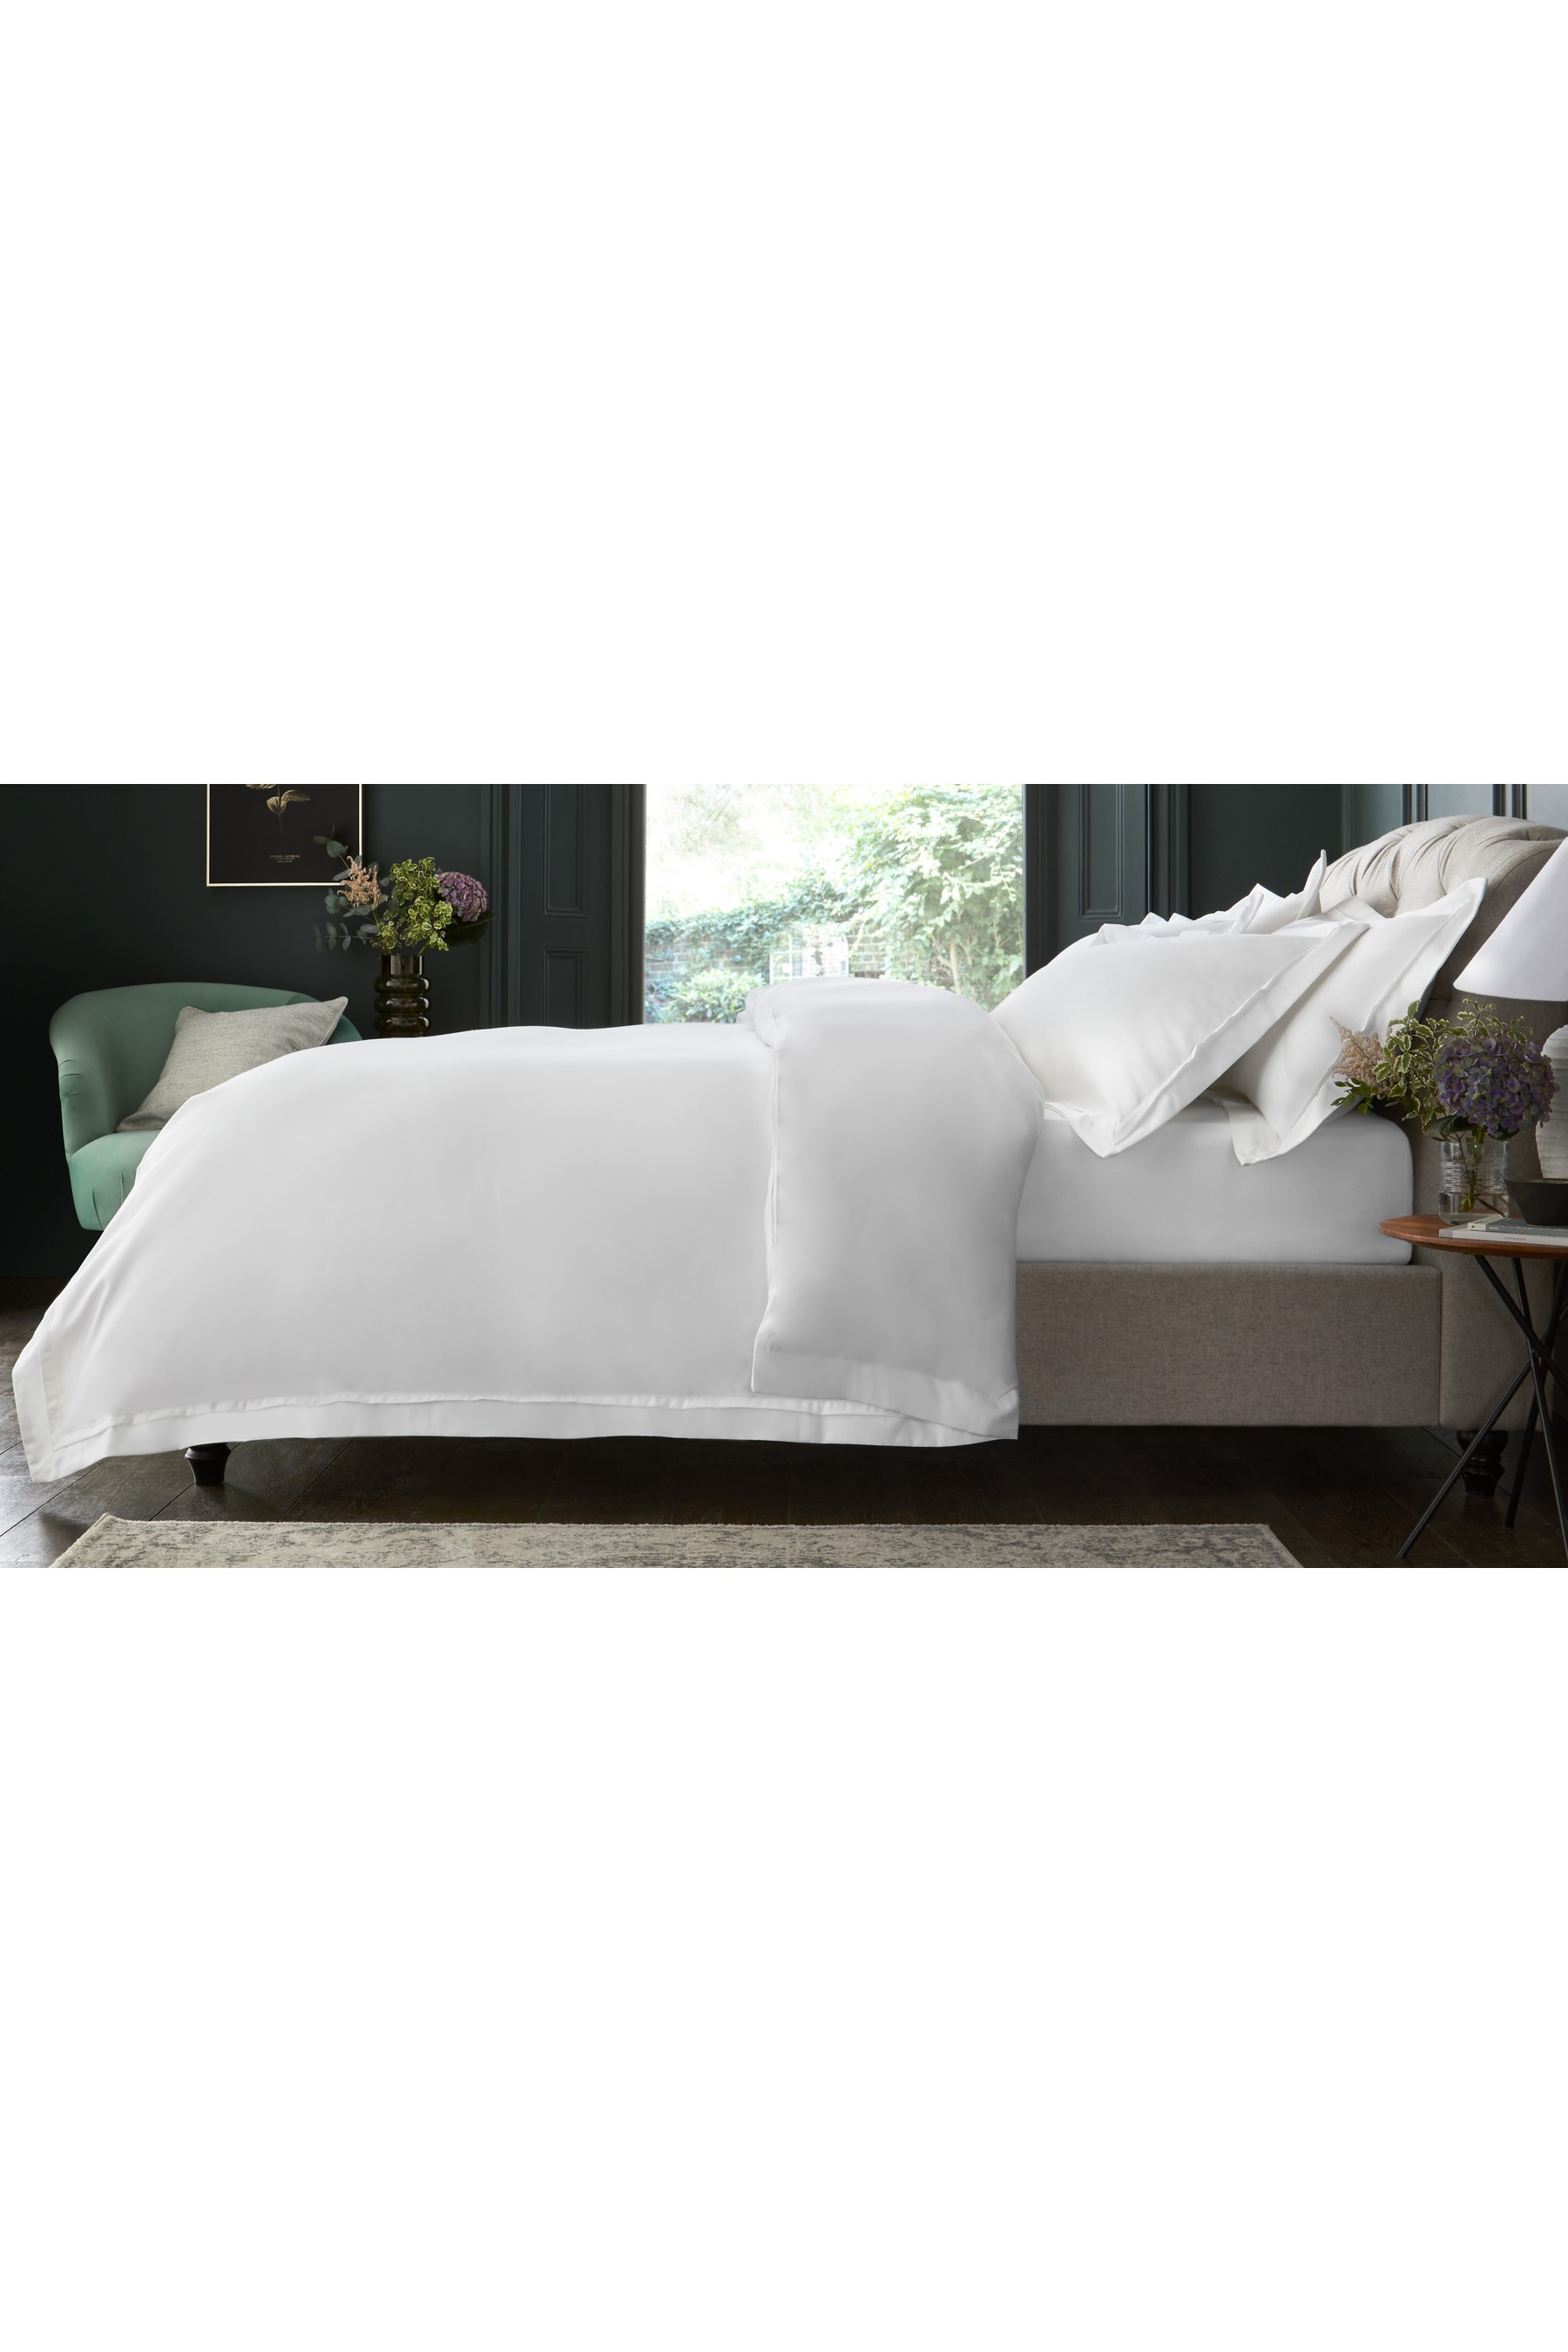 Collection Luxe 1000 Thread Count 100% Cotton Sateen Duvet Cover and Pillowcase Set Plain